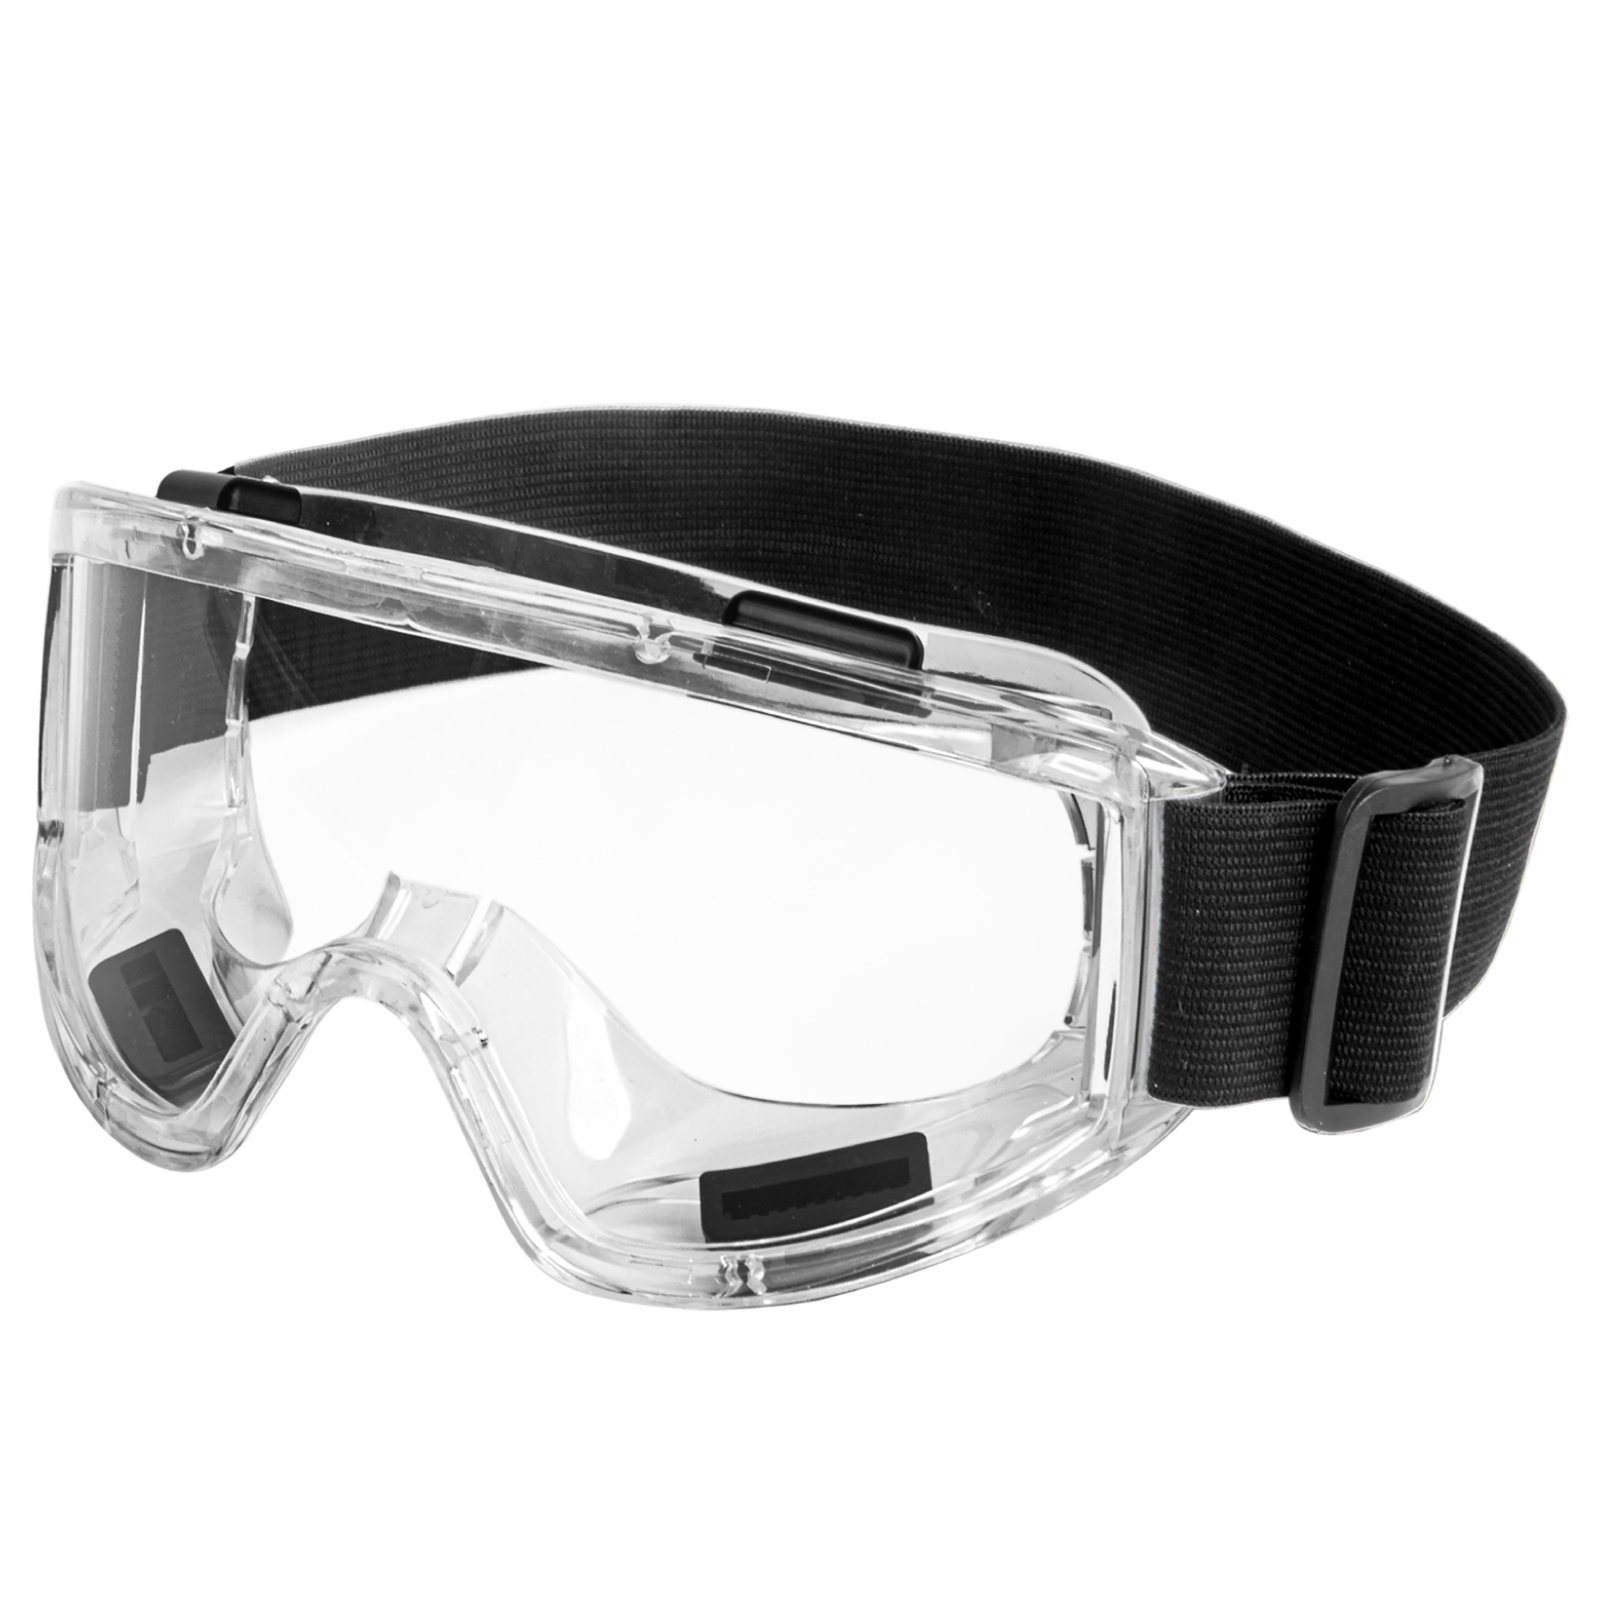 Diagonal view of a JORESTECH anti-fog ventilated safety goggle for high impact protection over white background